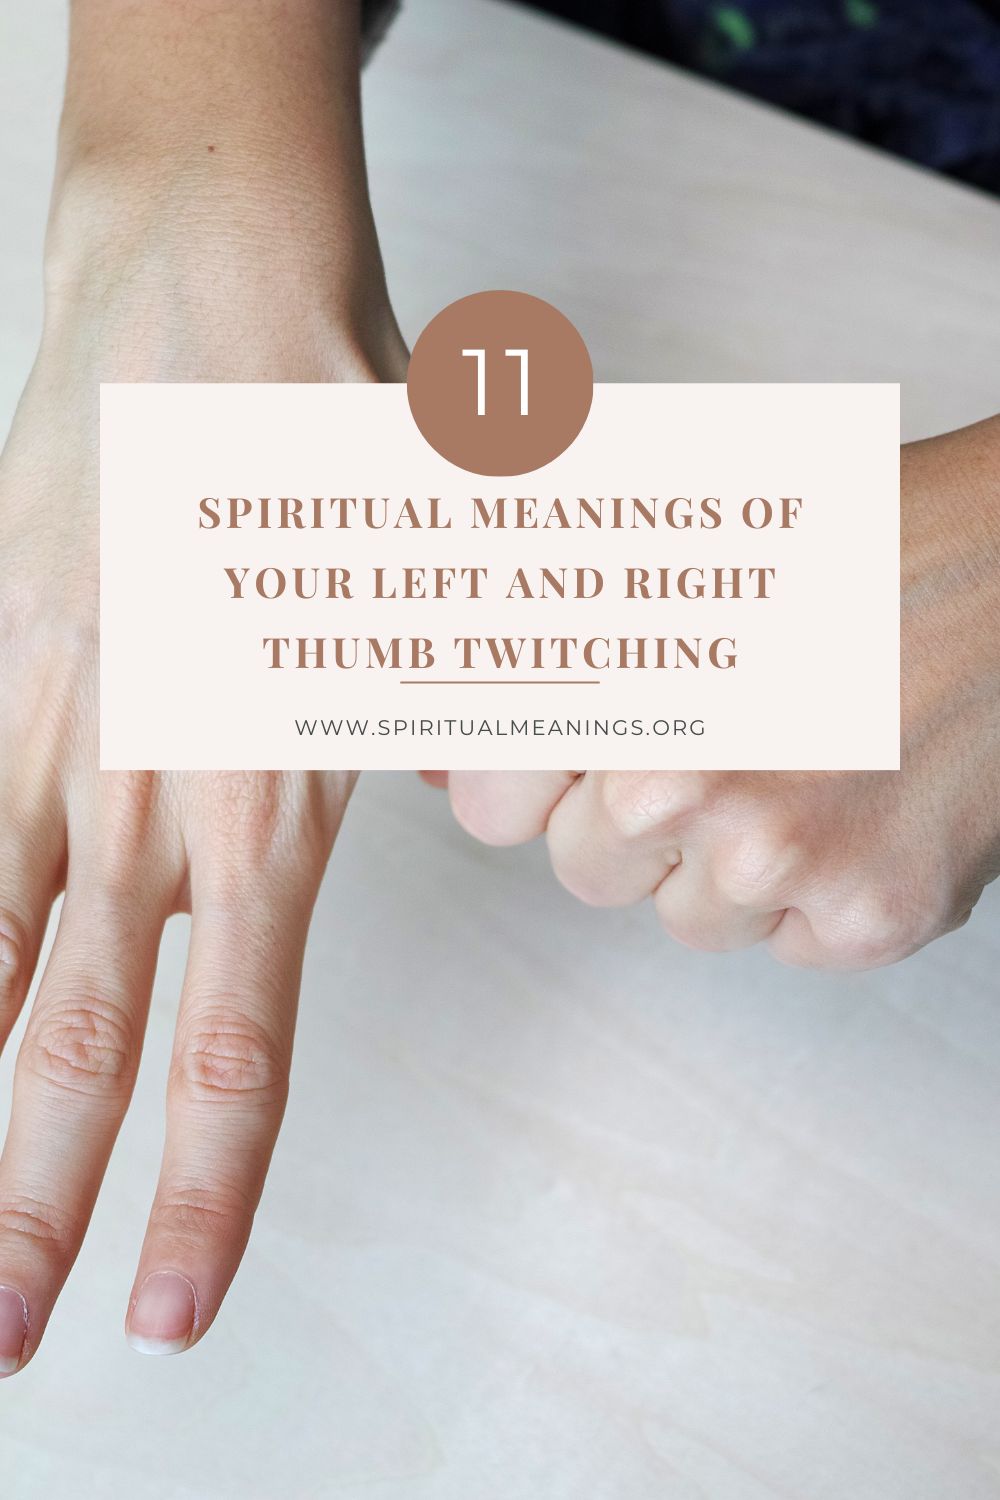 Spiritual Meanings Of Your Left and Right Thumb Twitching